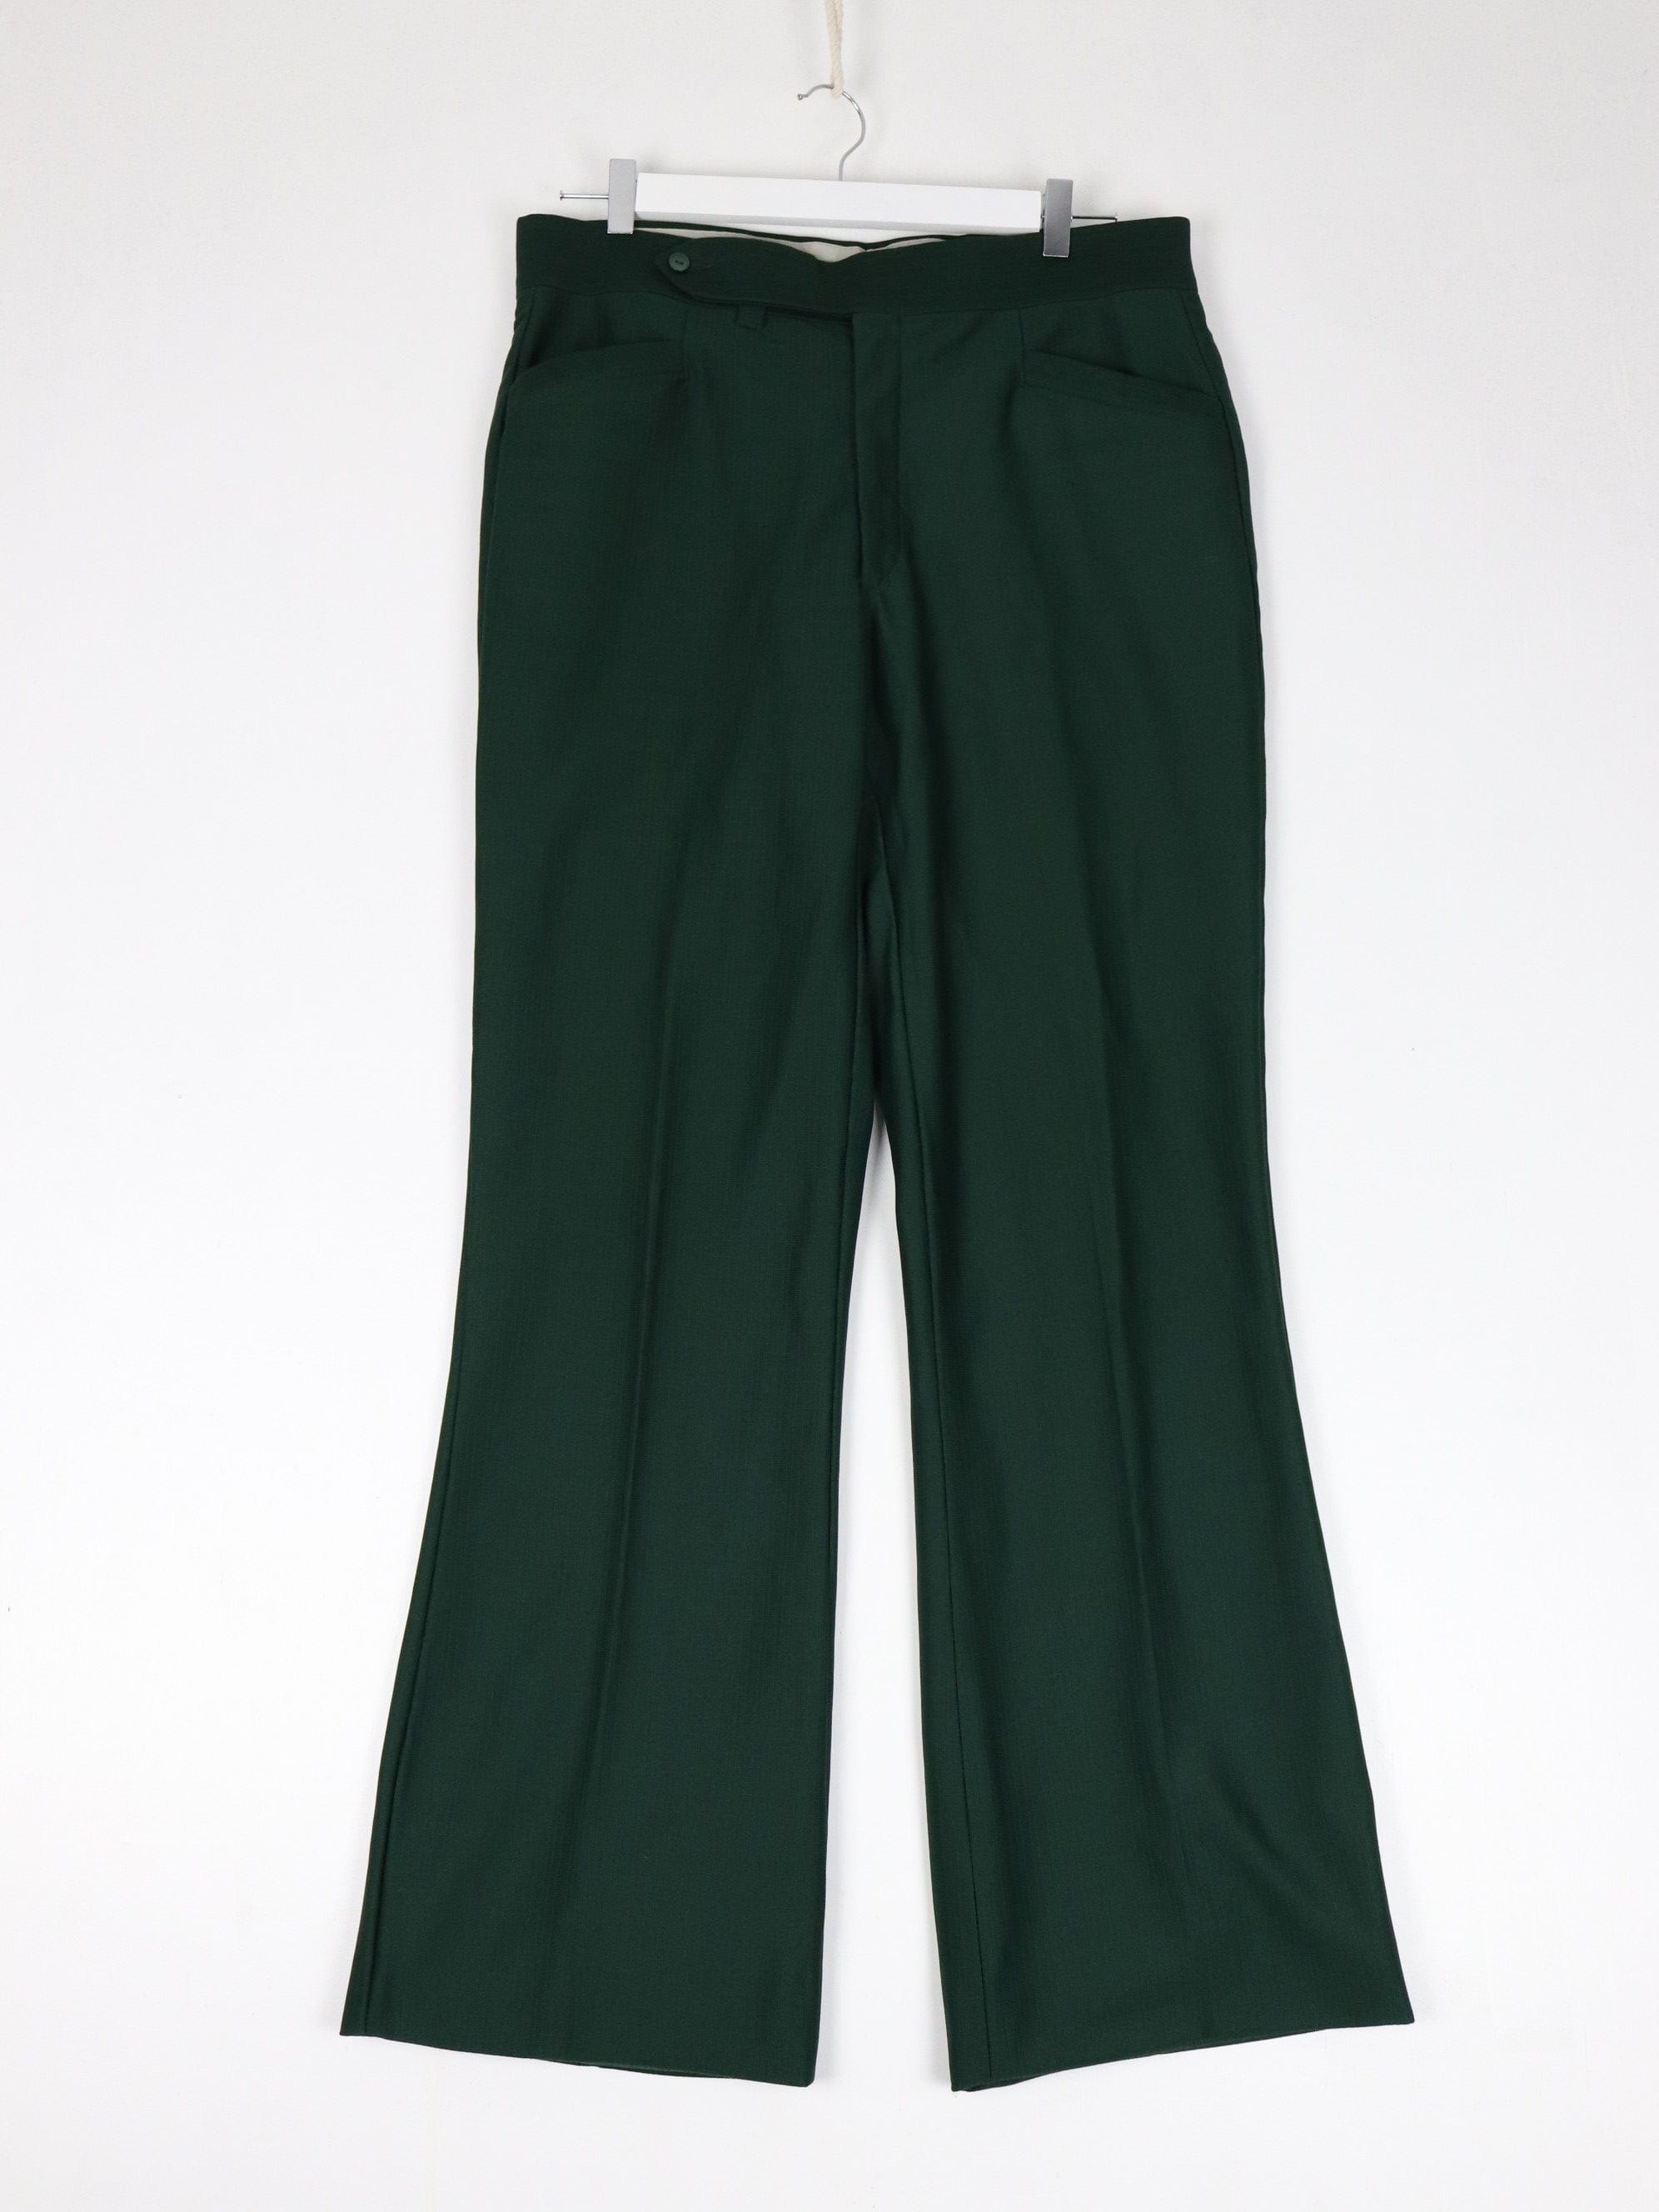 Vintage Dress Pants Mens 36 x 33 Green Pleated Trousers 70s 80s Flare –  Proper Vintage